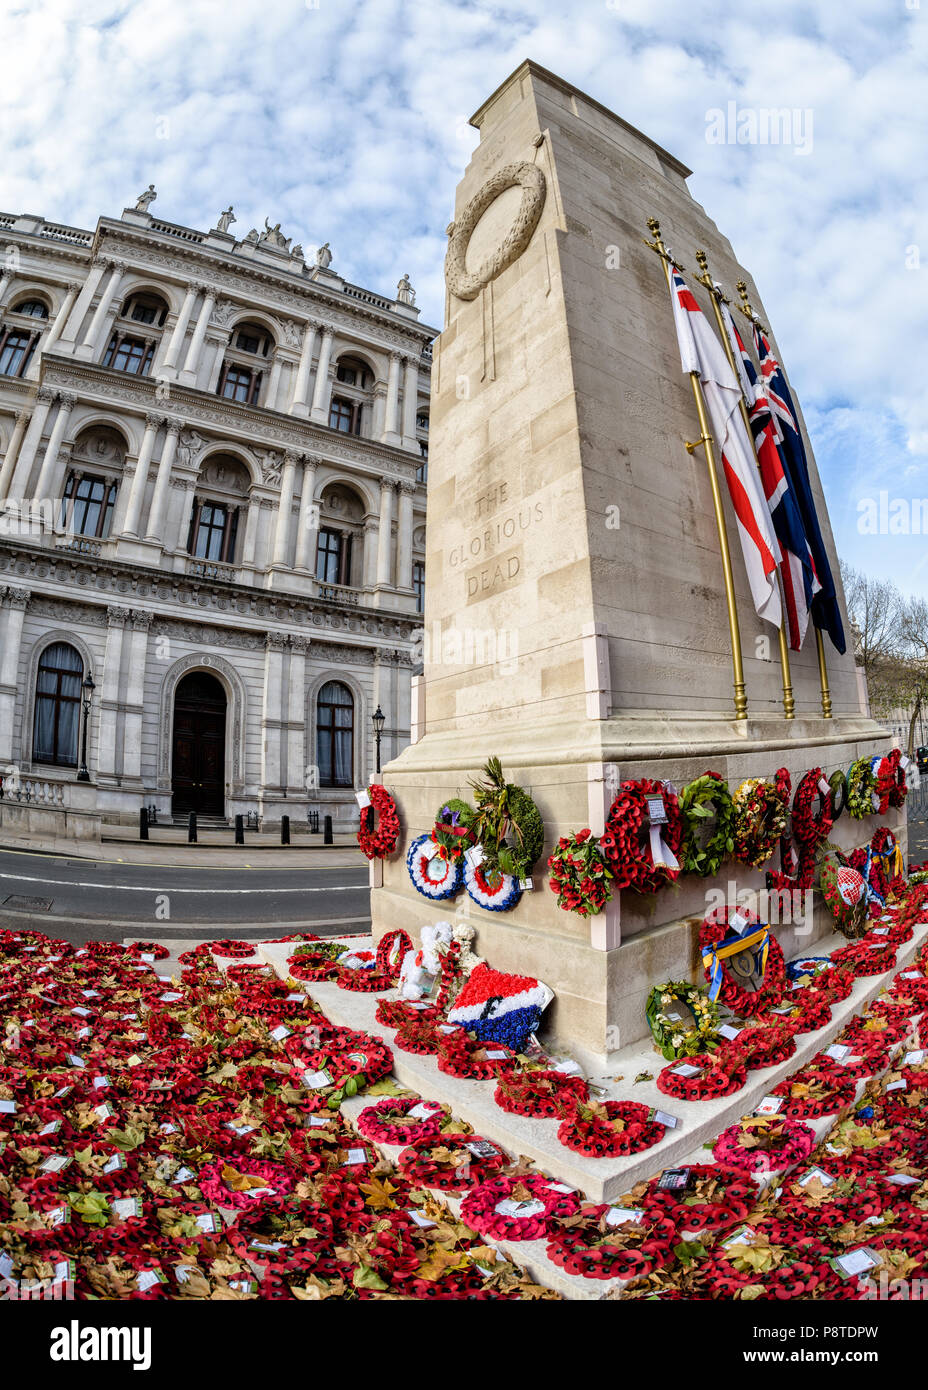 Wide angle portrait view of The Cenotaph in Whitehall, London, surrounded by wreaths of red poppies Stock Photo